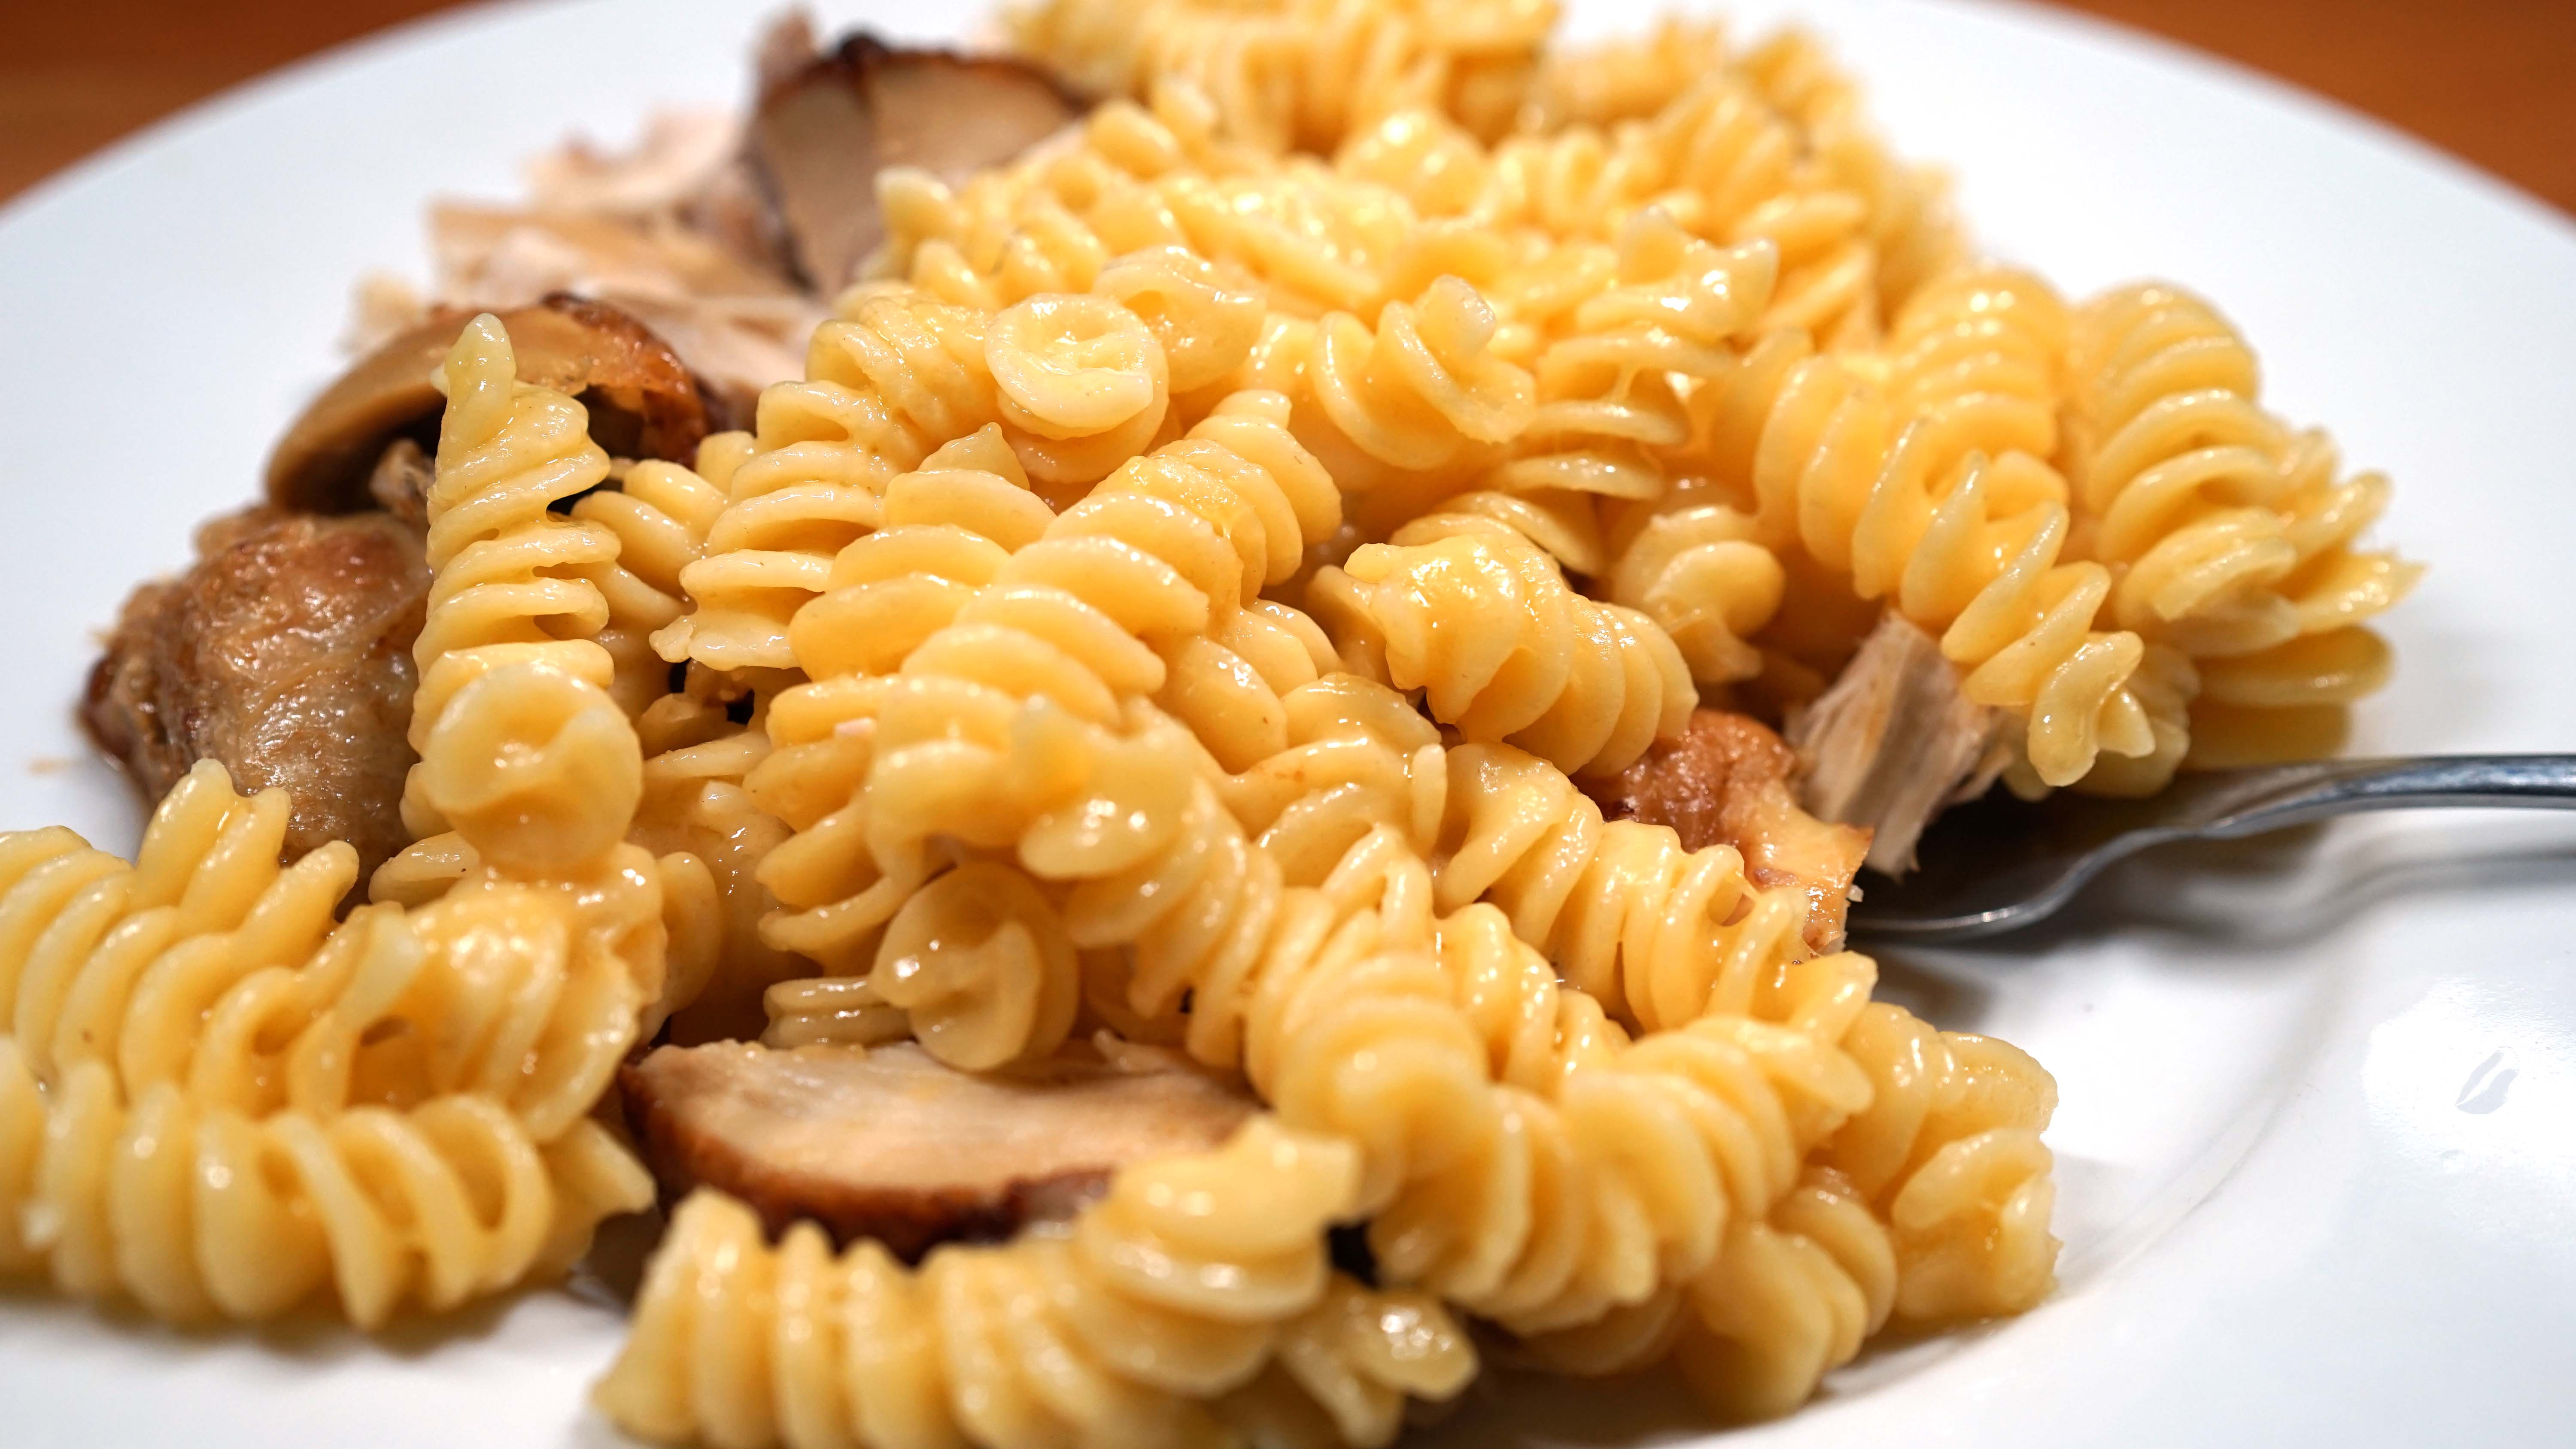 fusilli noodles macaroni and cheese